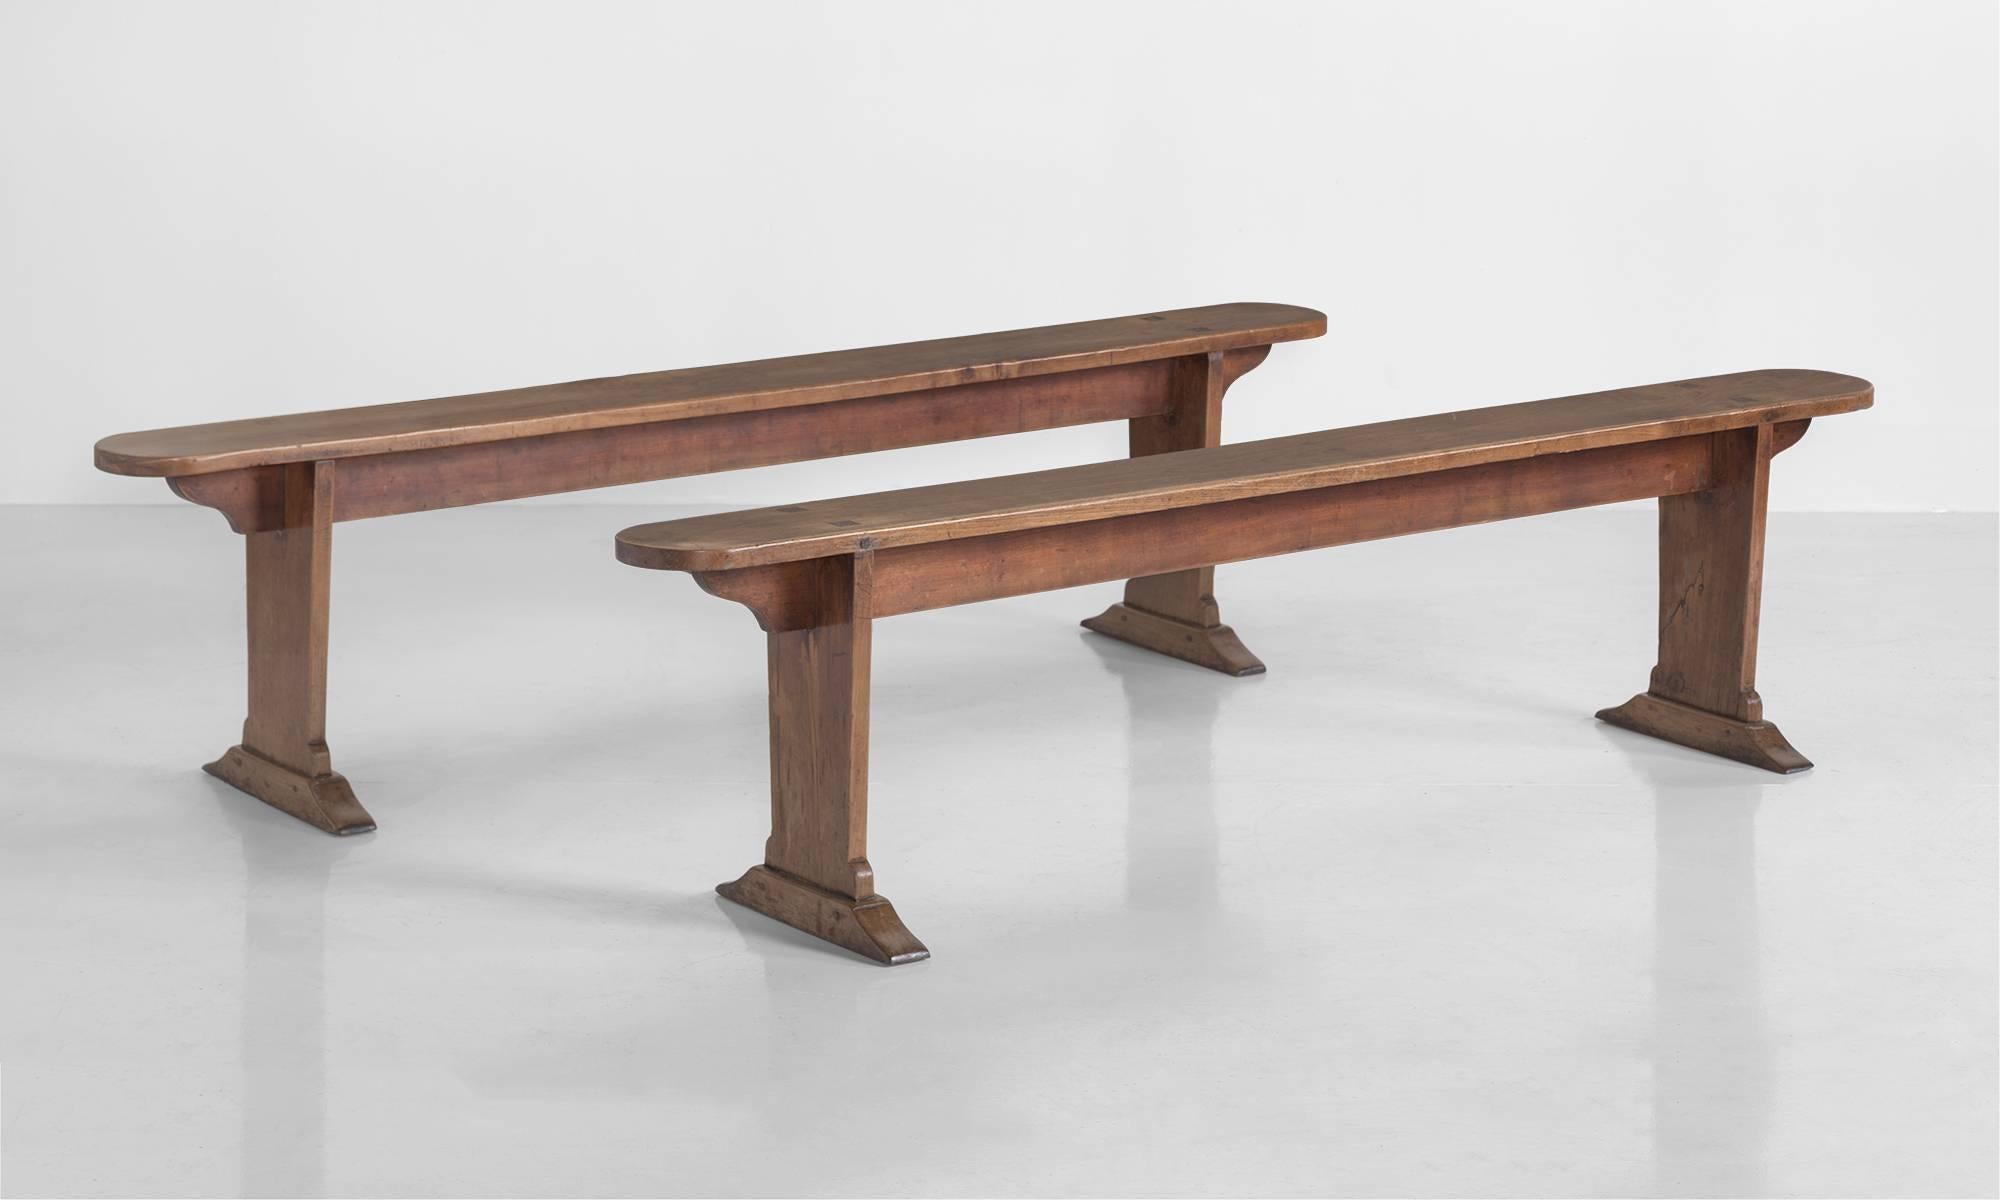 Cherrywood bench, circa 1850.

Solid cherrywood bench with rounded edge, on taper legs and sledge feet.